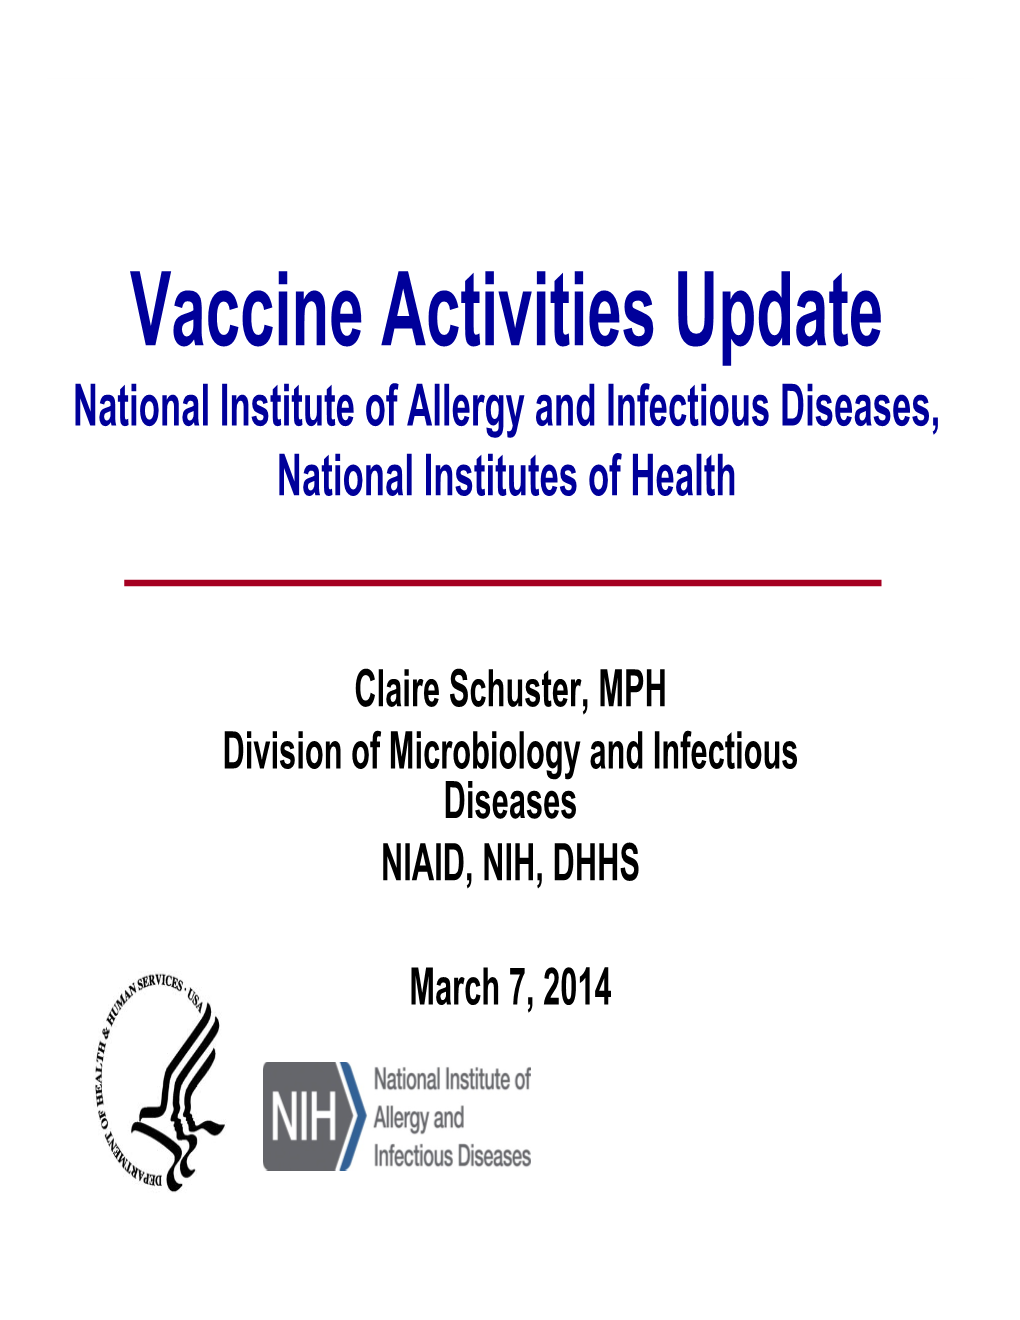 Vaccine Activities Update National Institute of Allergy and Infectious Diseases, National Institutes of Health